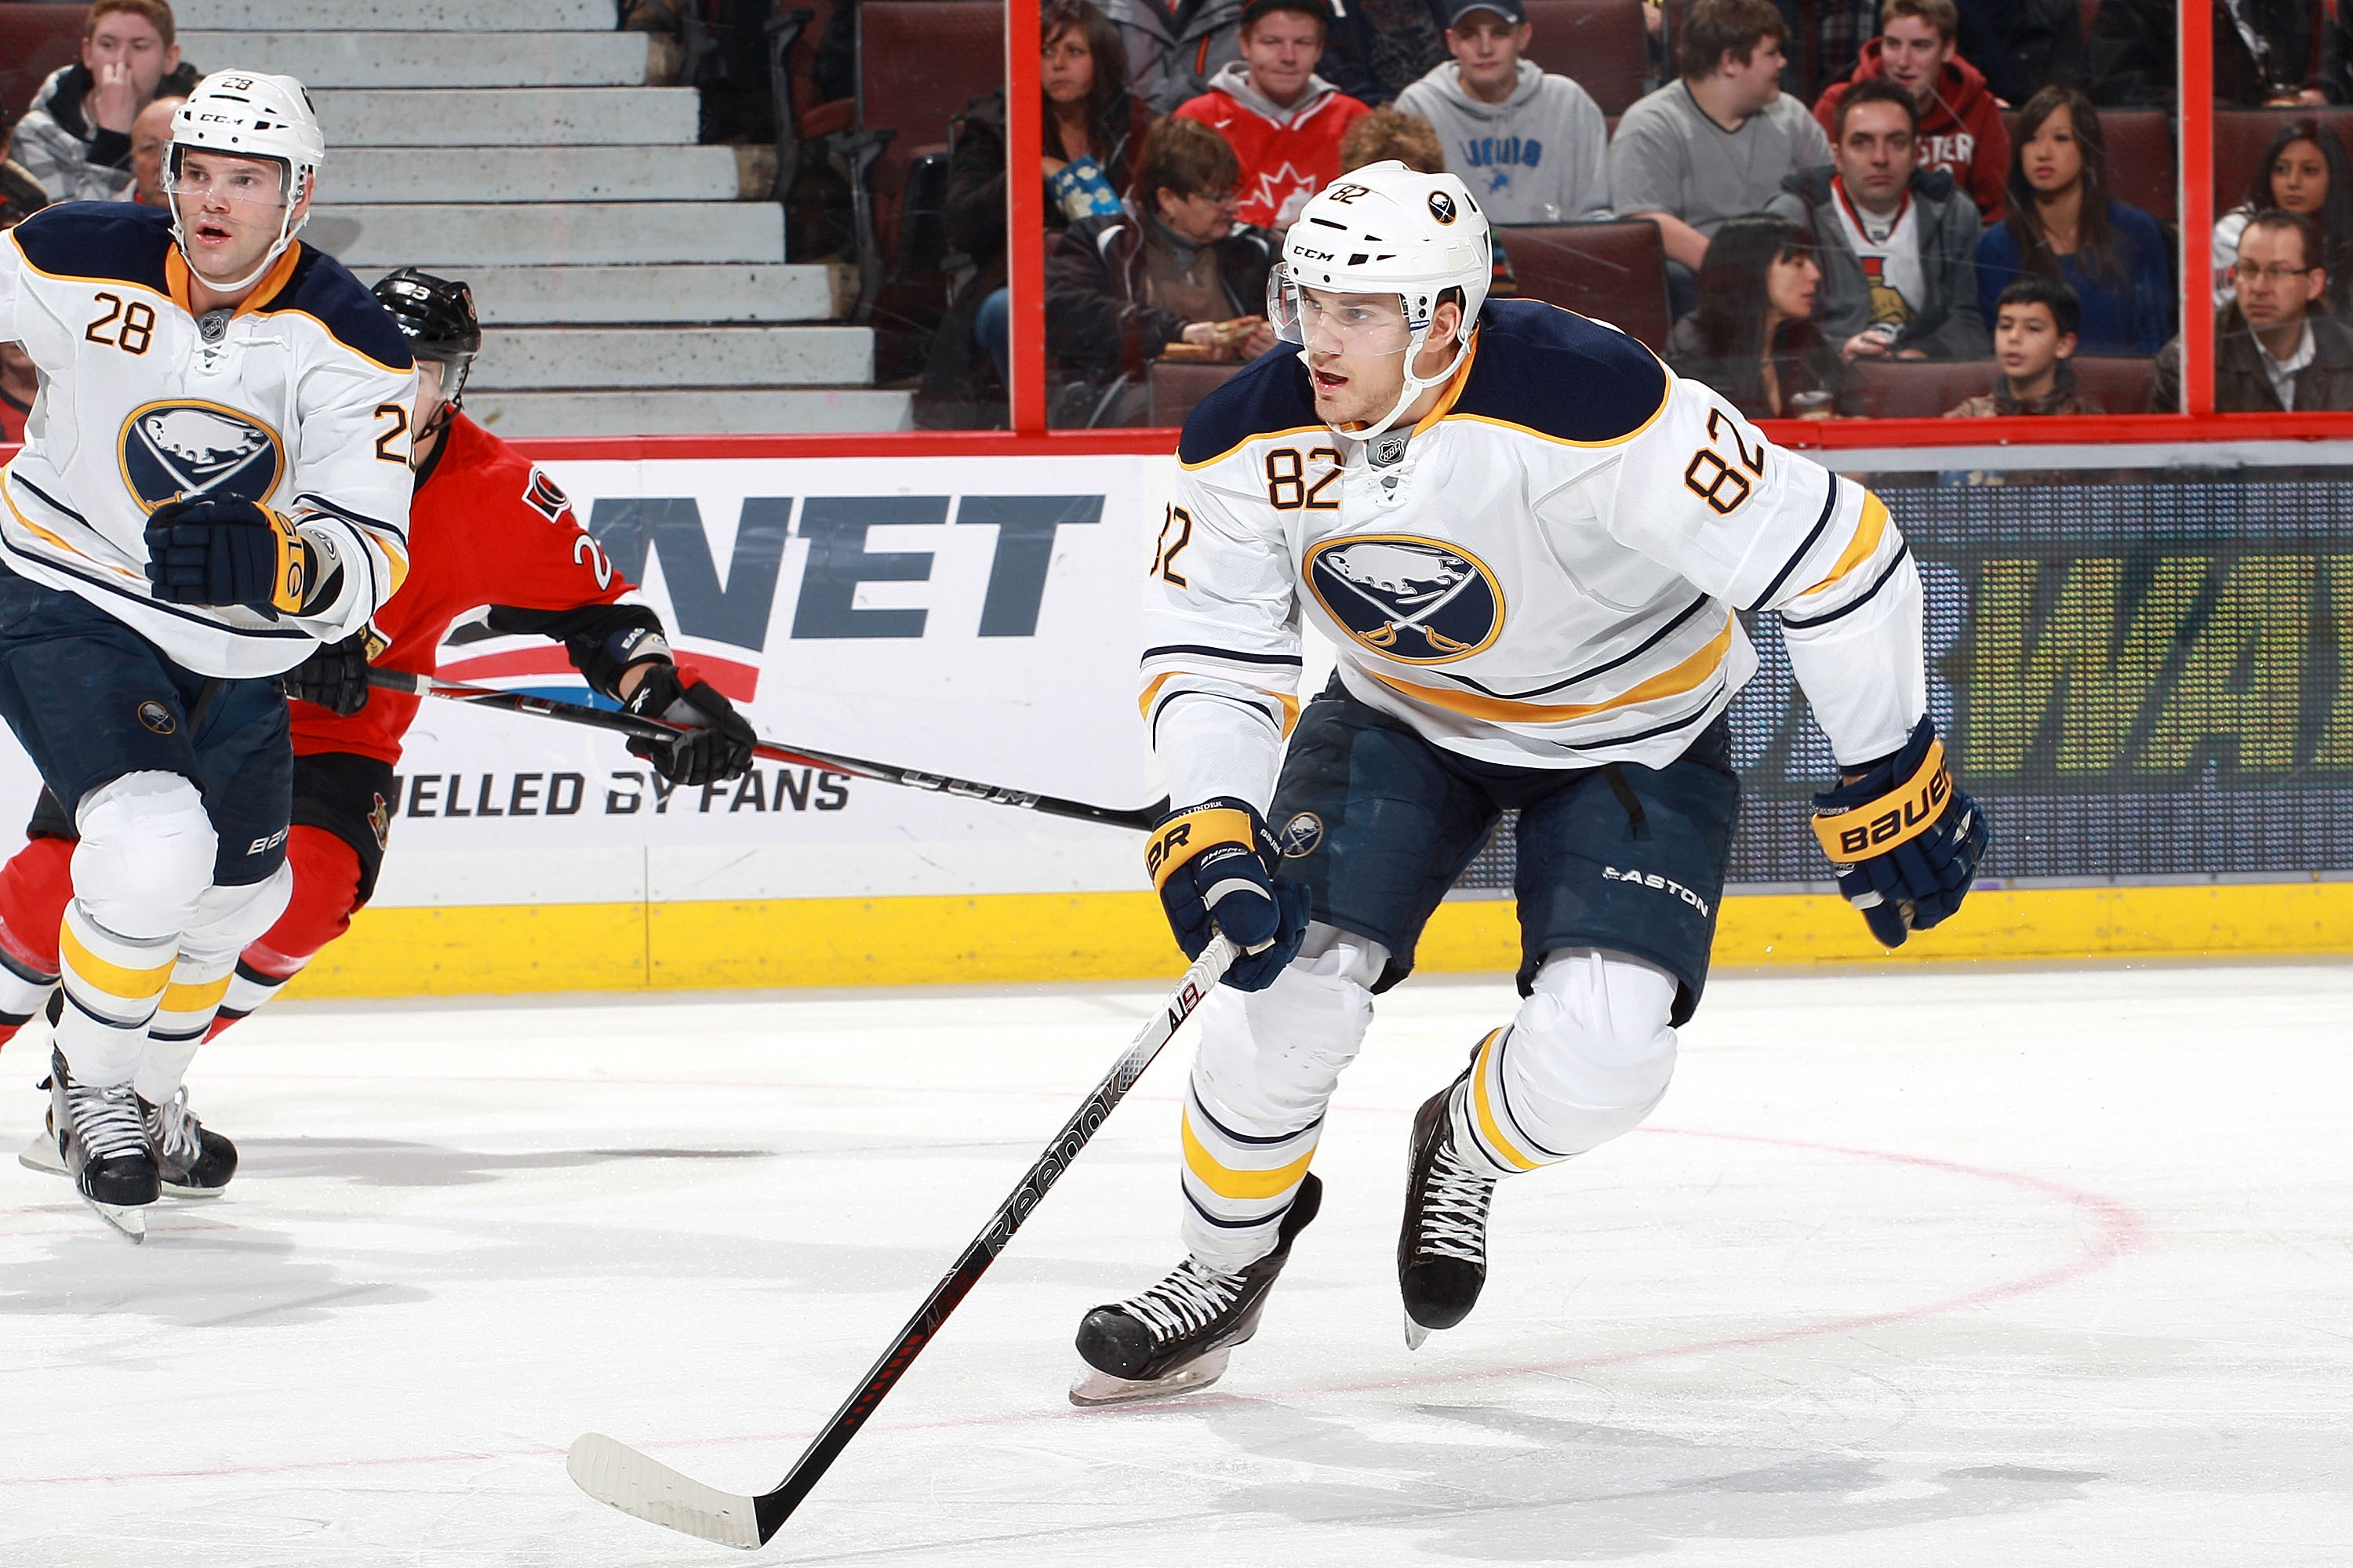 Marcus Foligno builds on family name with Sabres